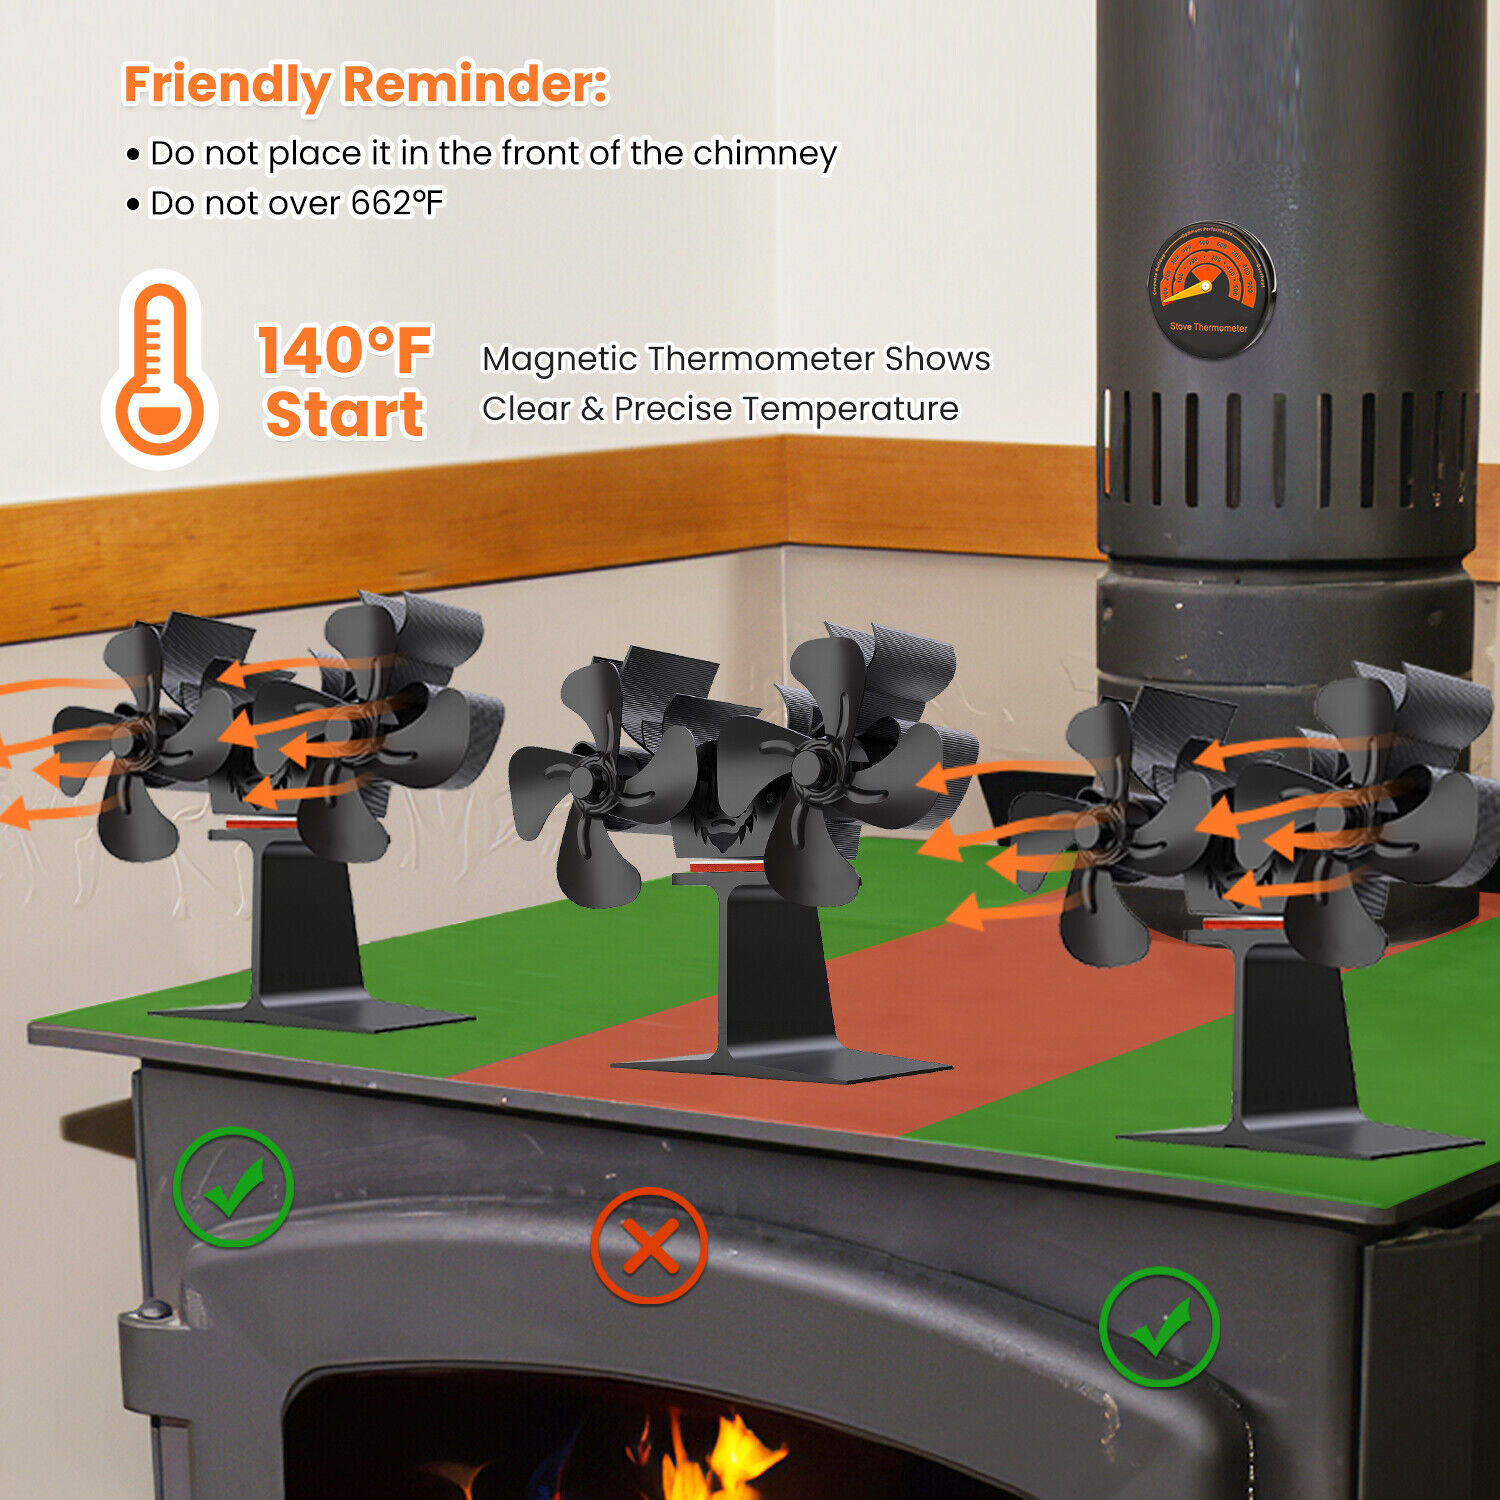 imountek 8-Blade Dual Head Heat Powered Wood Stove Fan Fireplace W/ Magnetic Thermometer